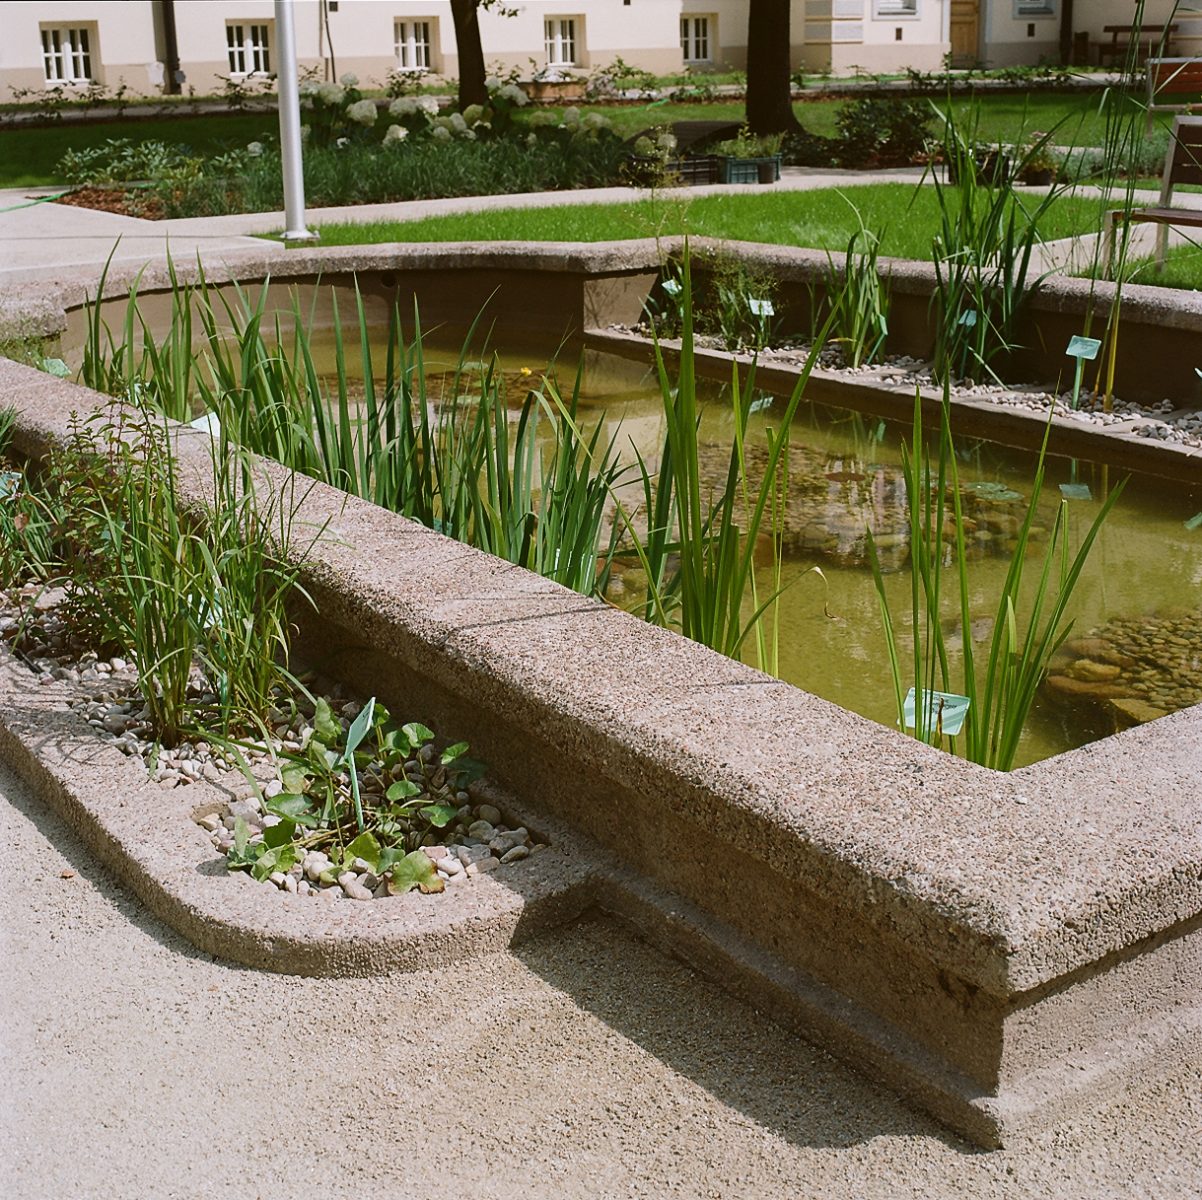 A didactic pond on the grounds of Stefan Batory Secondary School No. 2, refurbished in 2019-20. Allows for hydrobotany lessons and achieving gardening accomplishments.